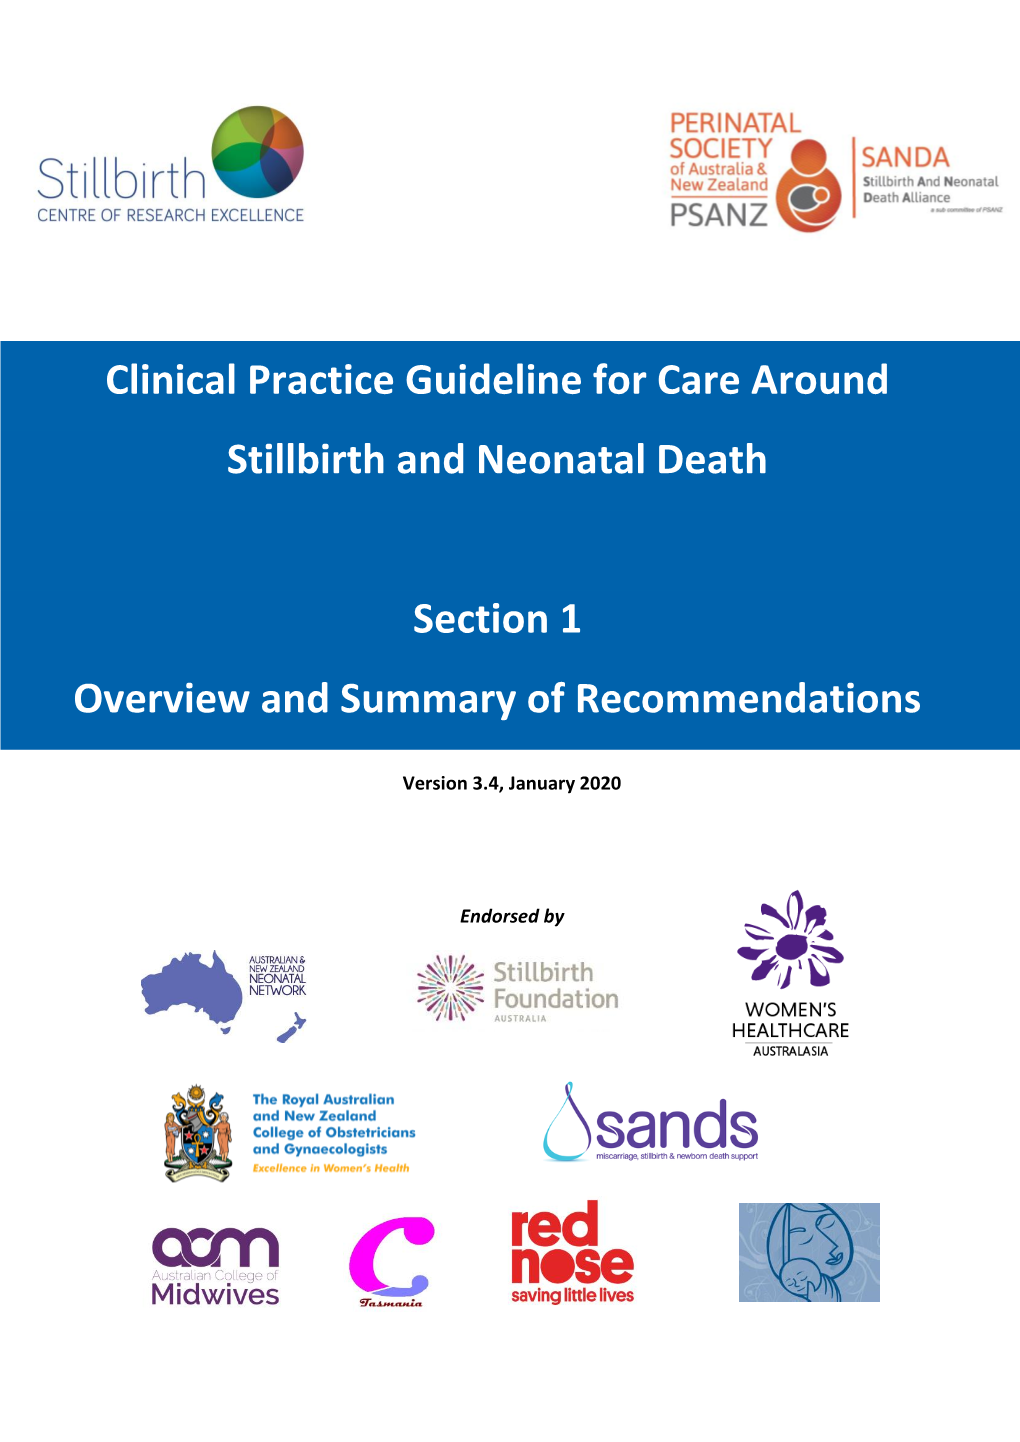 Clinical Practice Guideline for Care Around Stillbirth and Neonatal Death